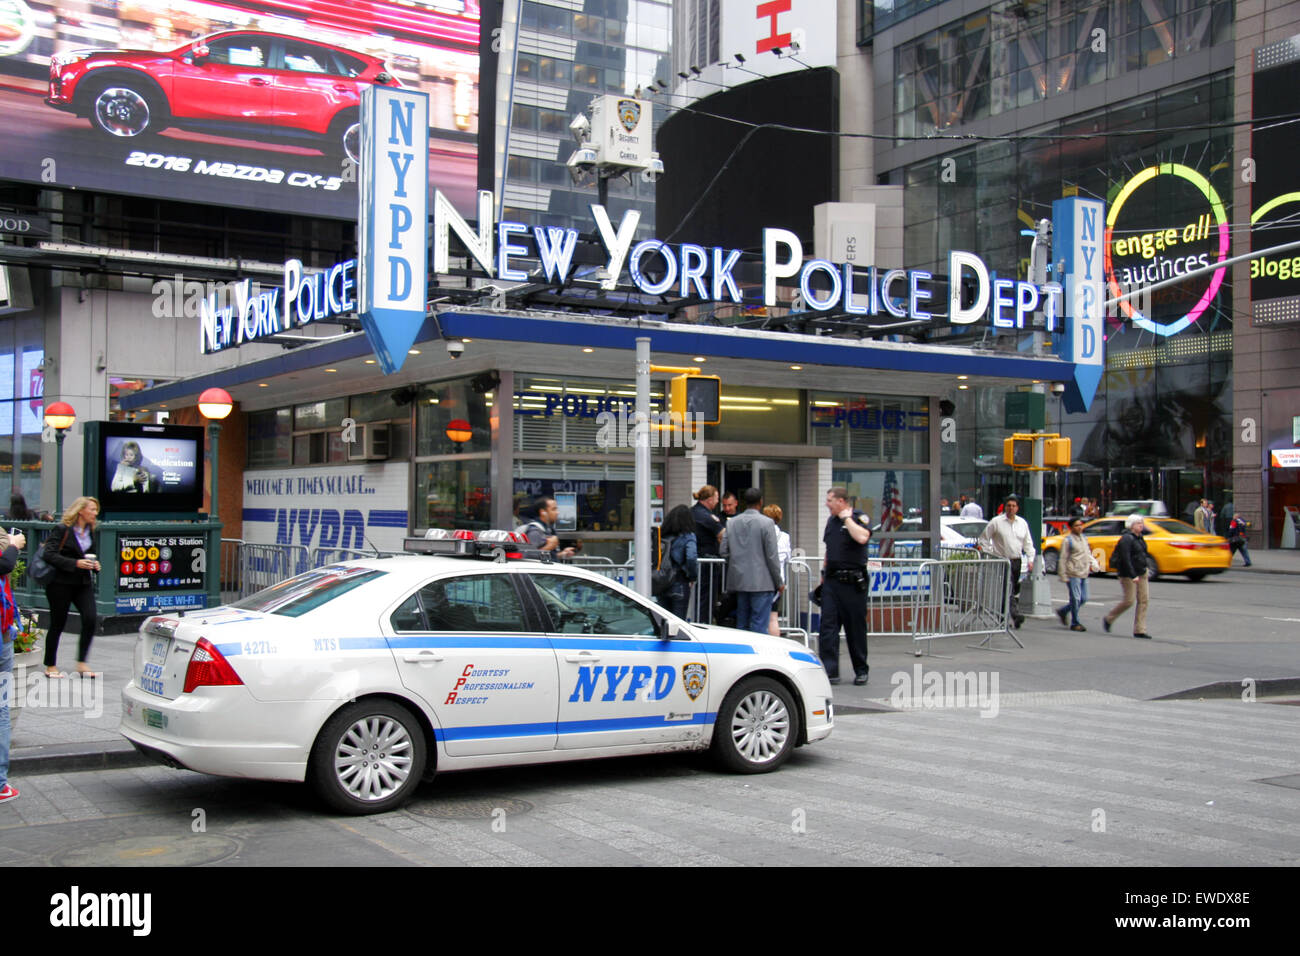 NYPD New York Police Department car and office, Times Square, Manhattan,  New York City, USA Stock Photo - Alamy